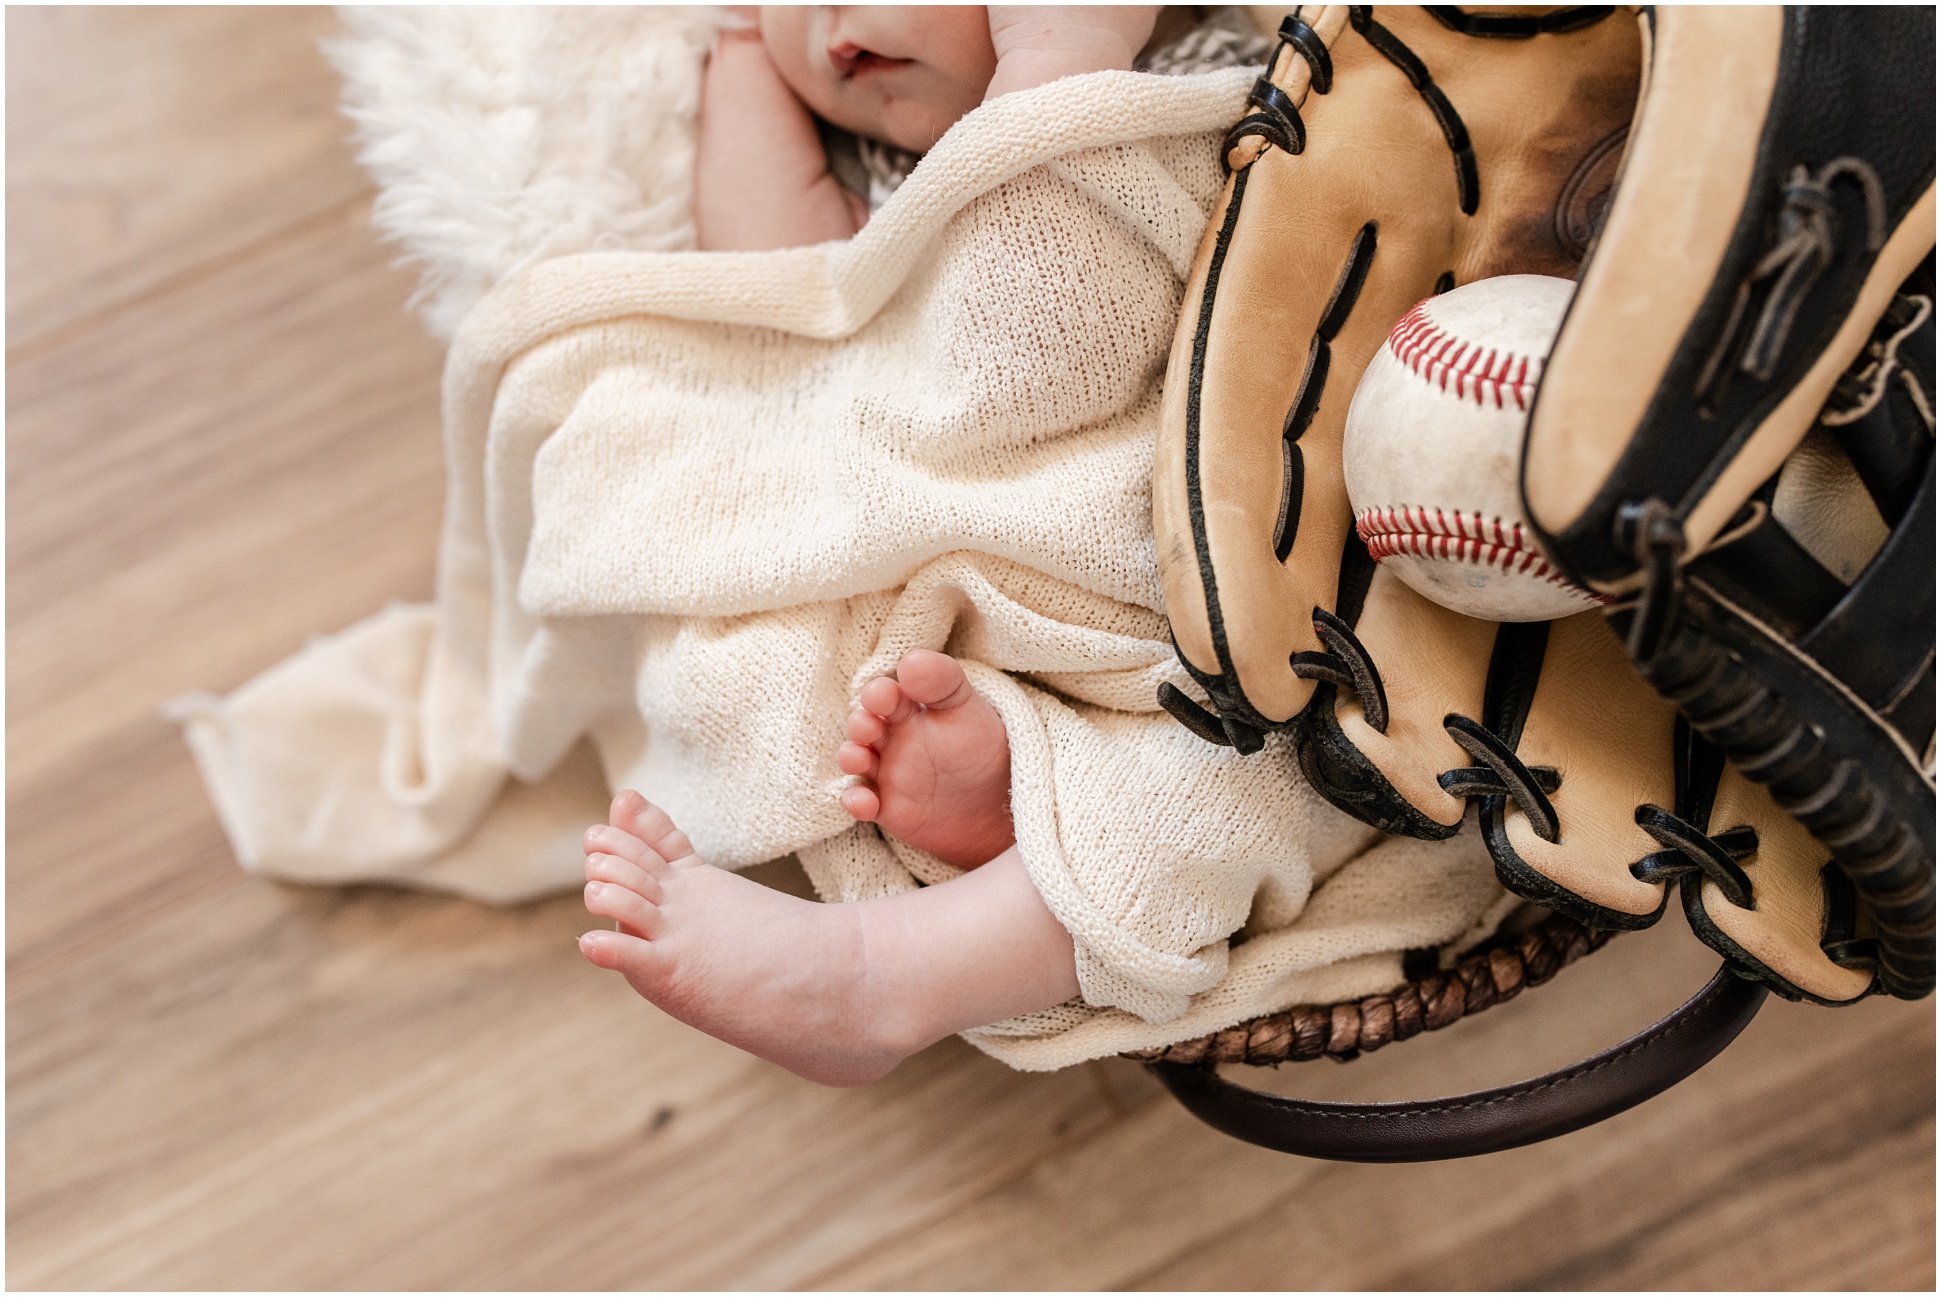 newborn baby feet sticking out of cream colored wrap next to baseball in baseball glove